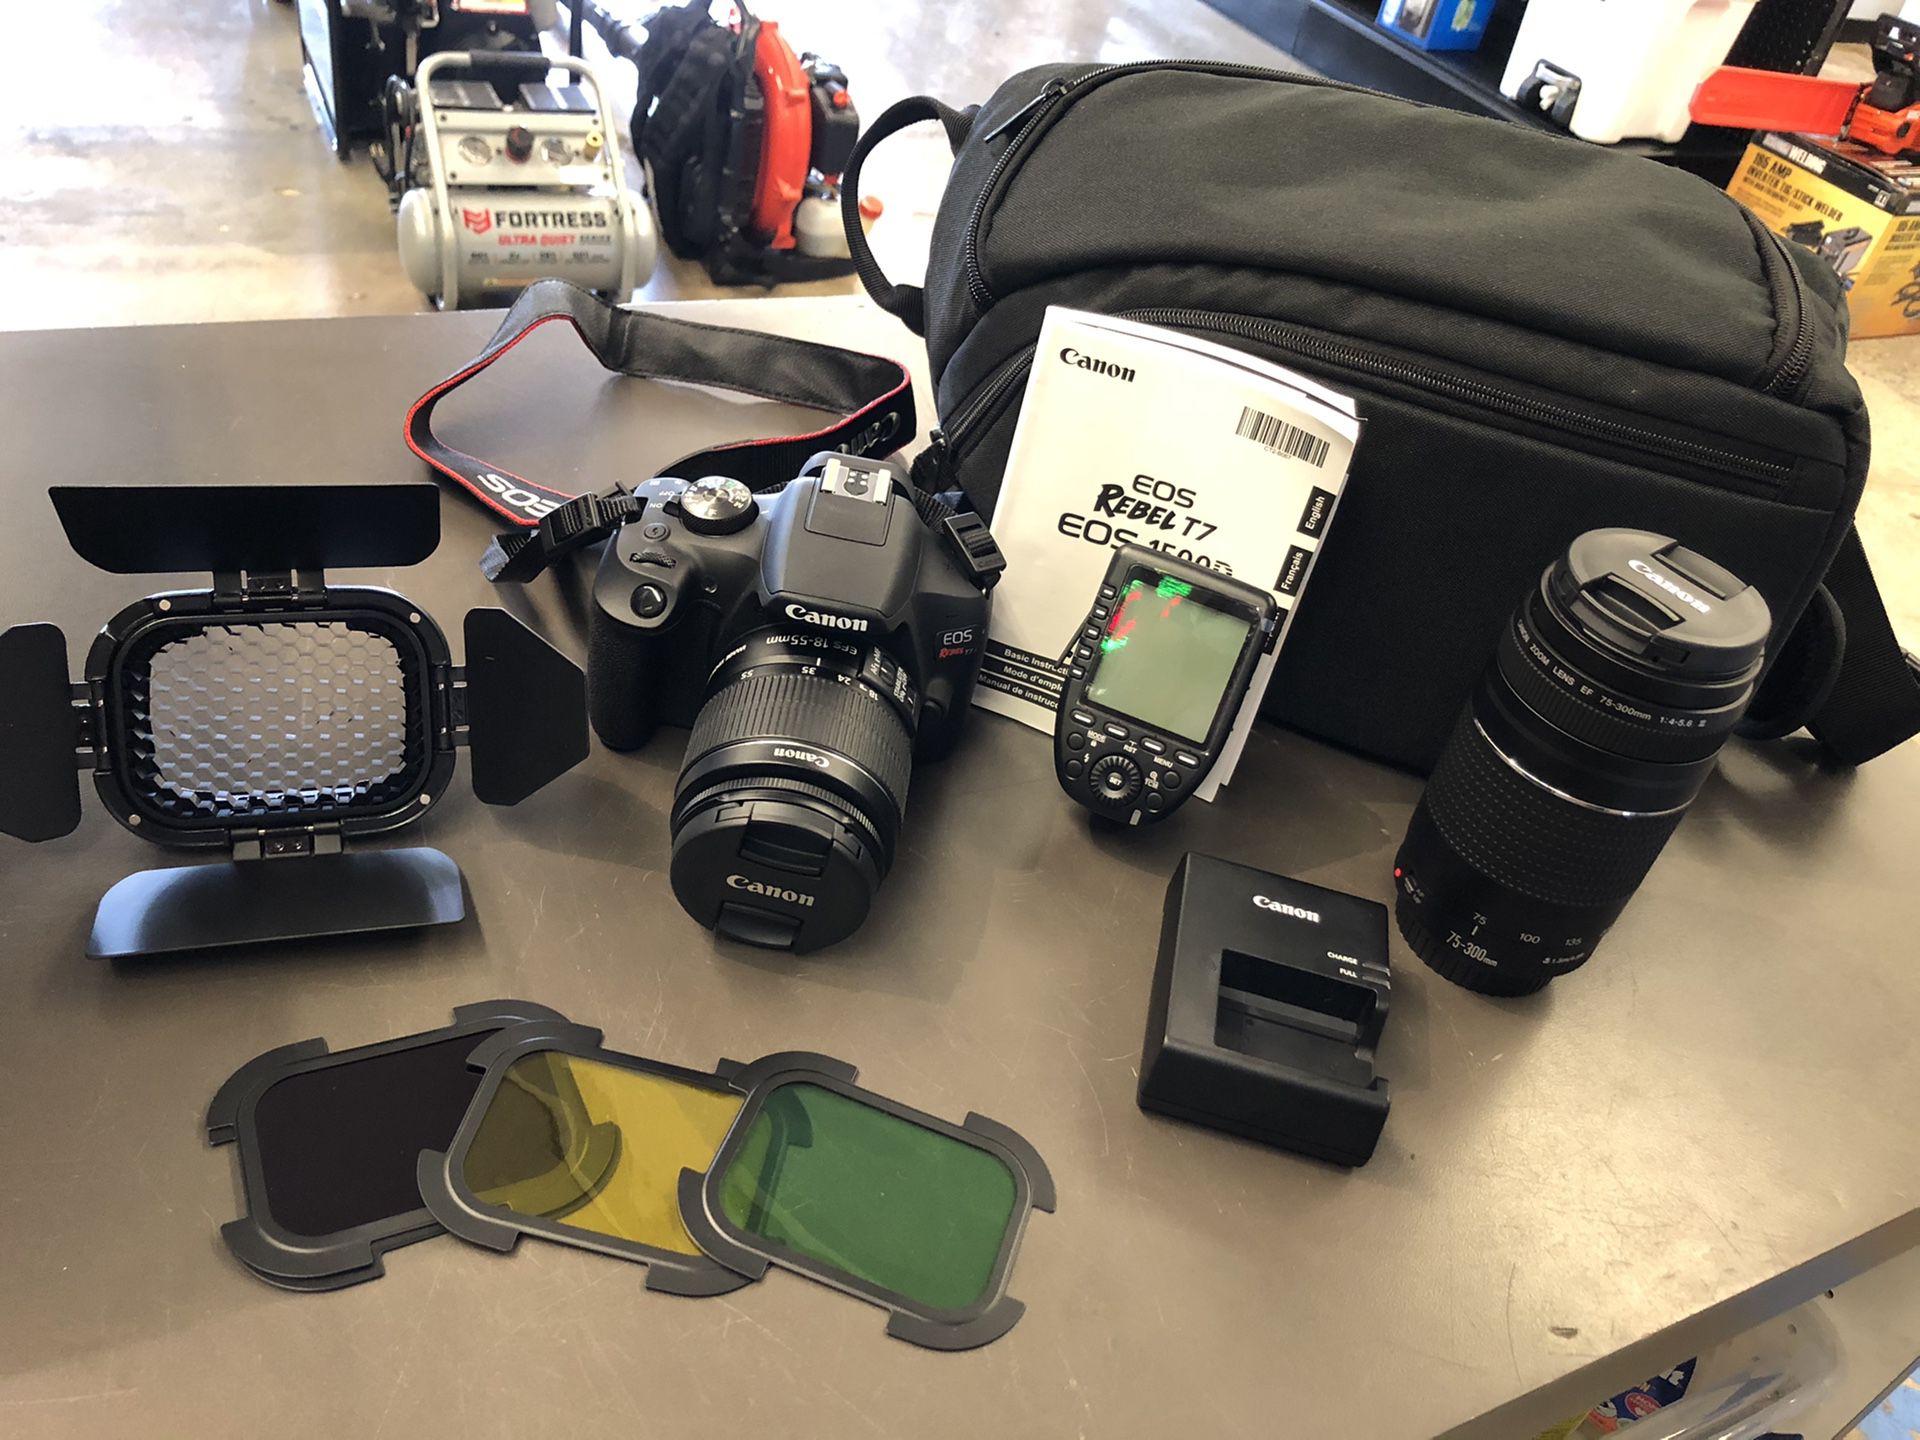 Canon EOS Rebel T7 camera with 18-55 mm Lens 75-300mm Lens godox barndoor and color filters Godox XProC TTL wireless flash battery charger and soft c